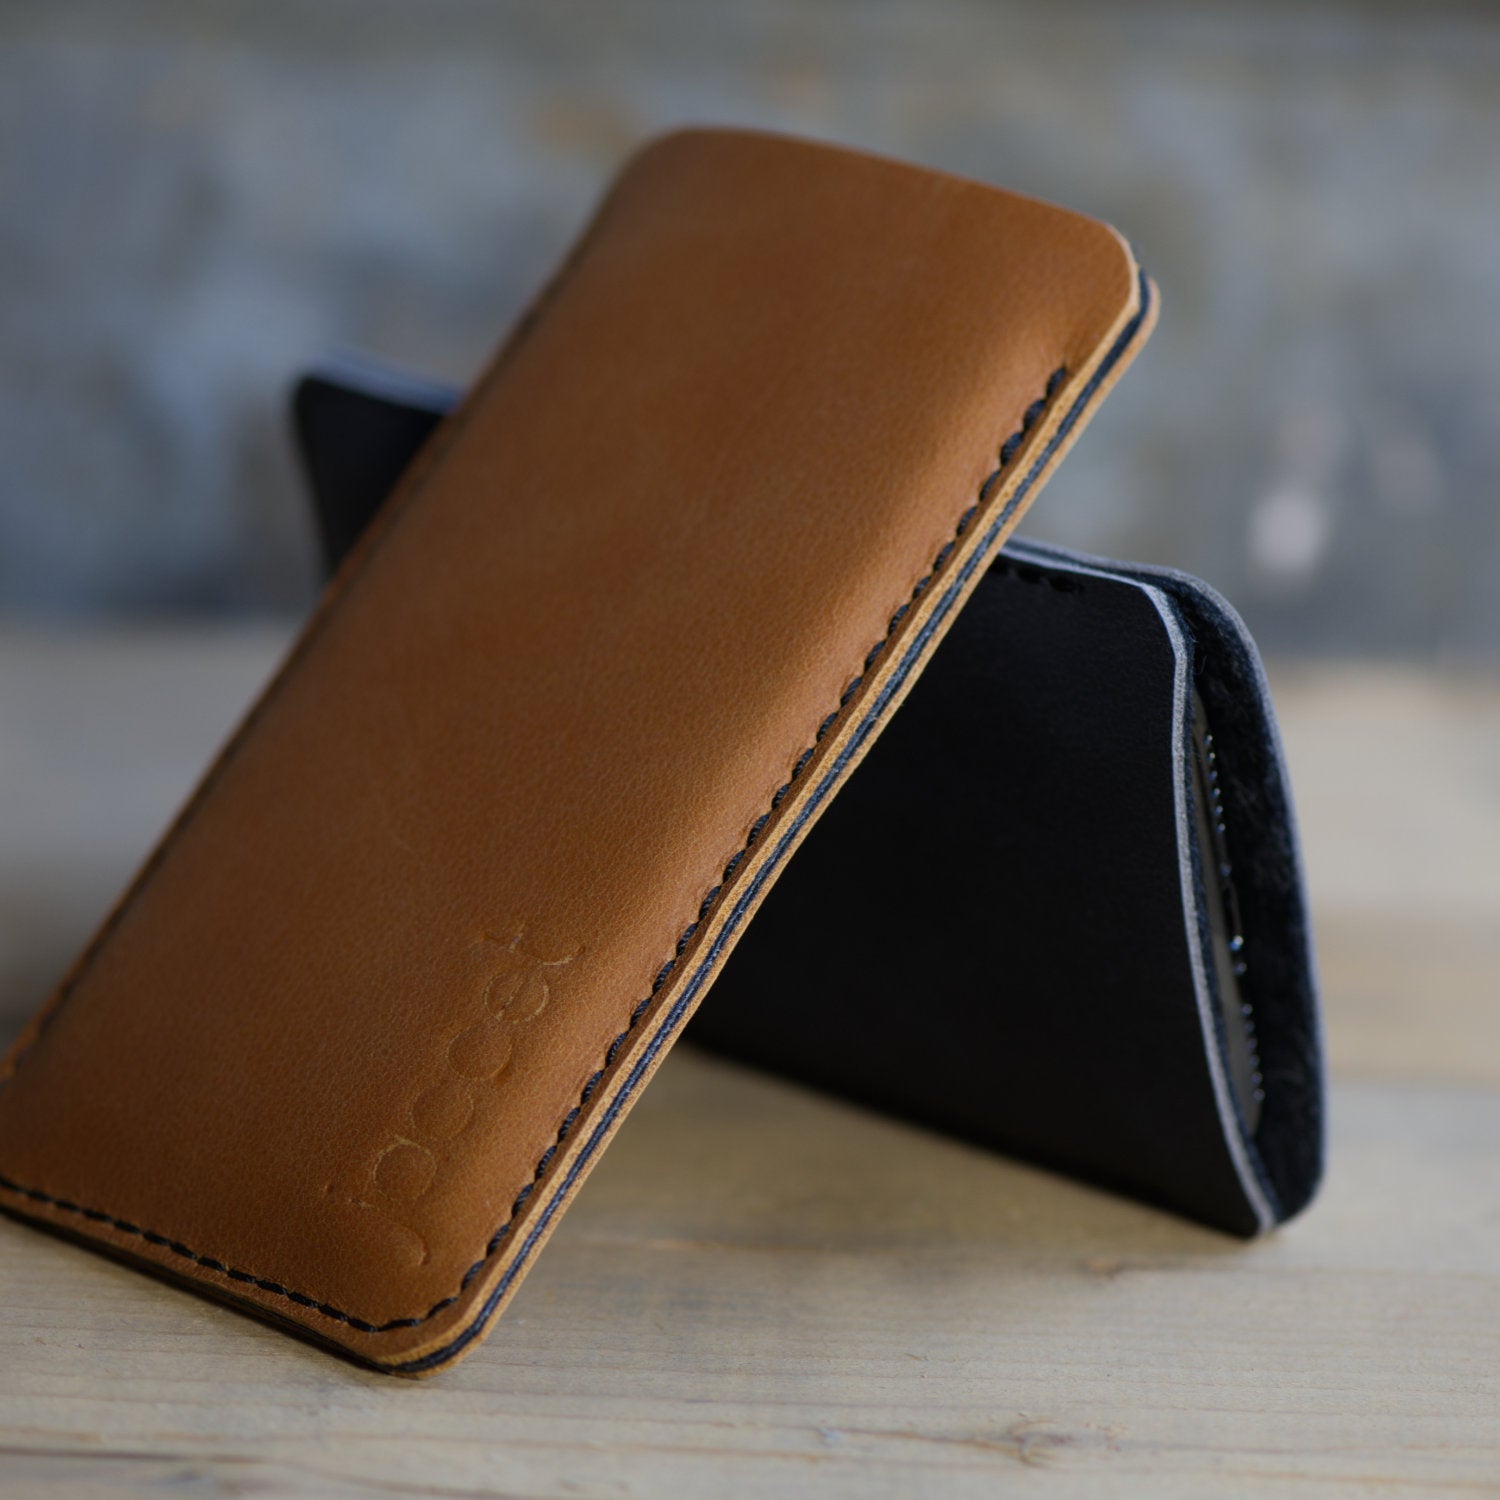 JACCET leather Sony Xperia sleeve - Cognac color leather with black wool felt - 100% Handmade